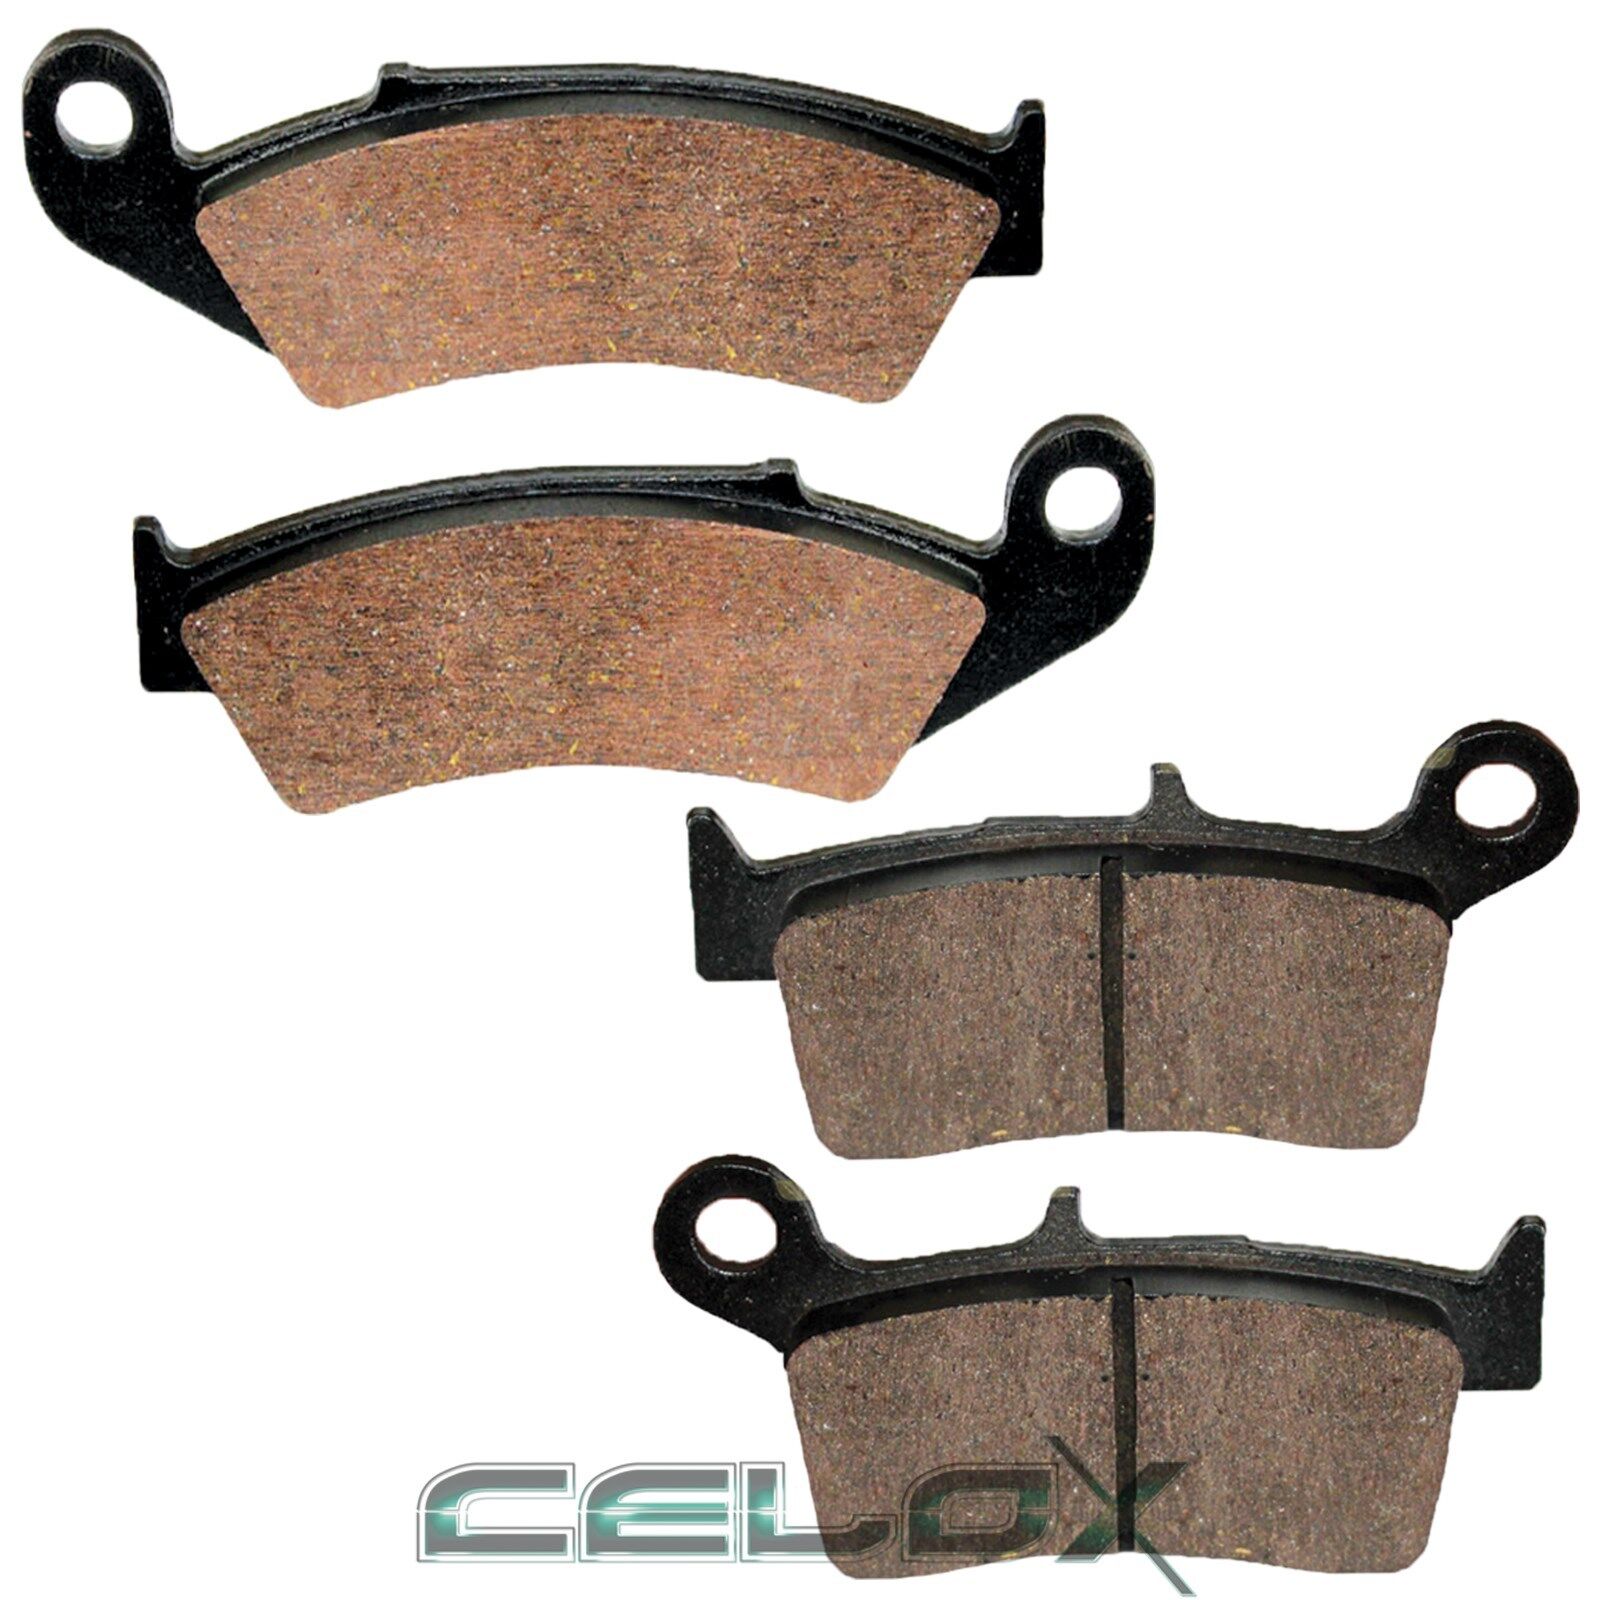 Front Rear Brake Pads for Yamaha YZ250 Competition 250 1998 1999 2000 2001 2002